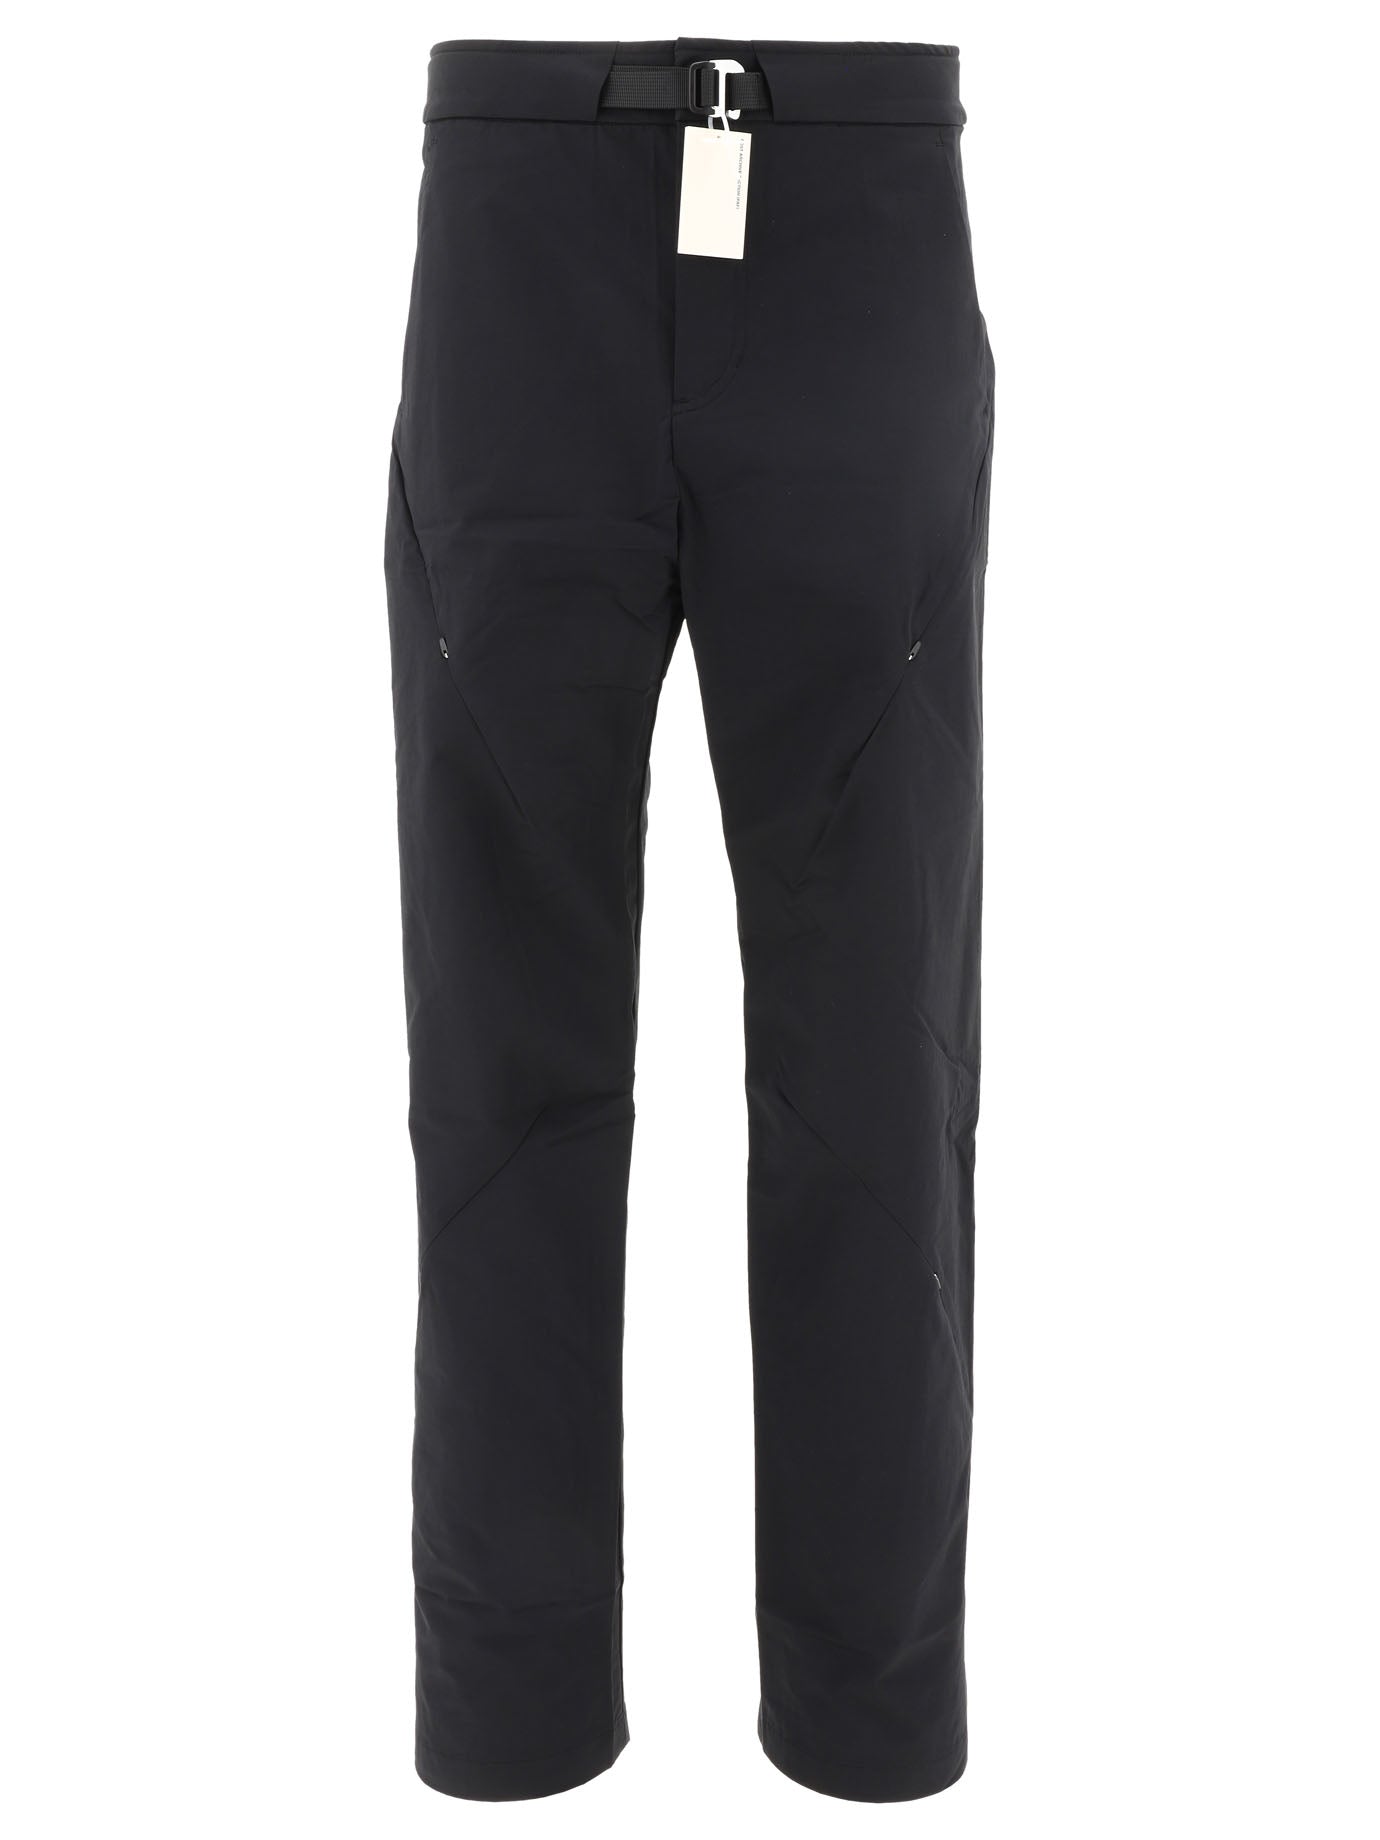 Post Archive Faction (paf) 5.0 Trousers Black